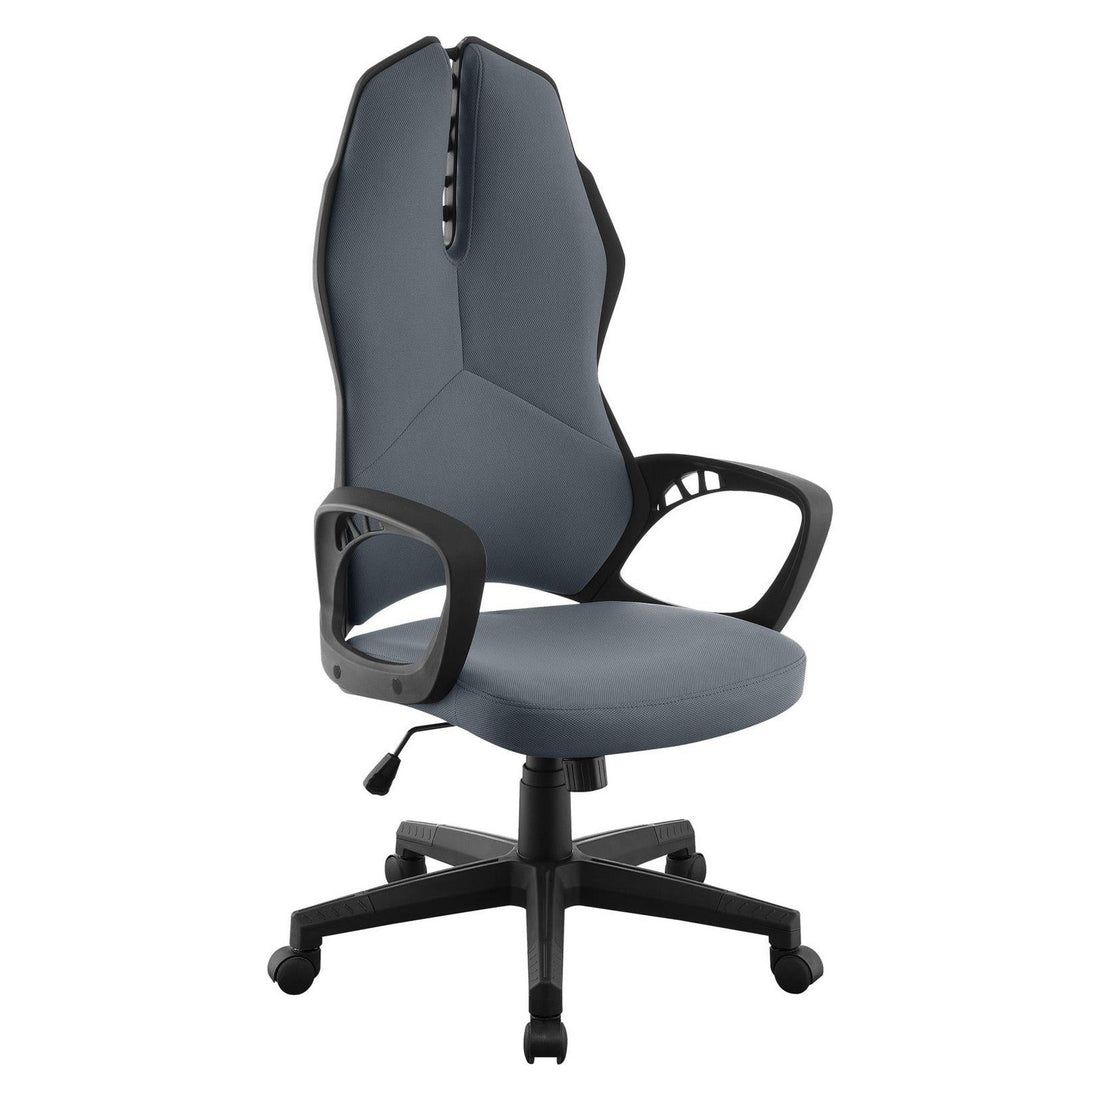 Upholstered Office Chair Dark Grey and Black 881366